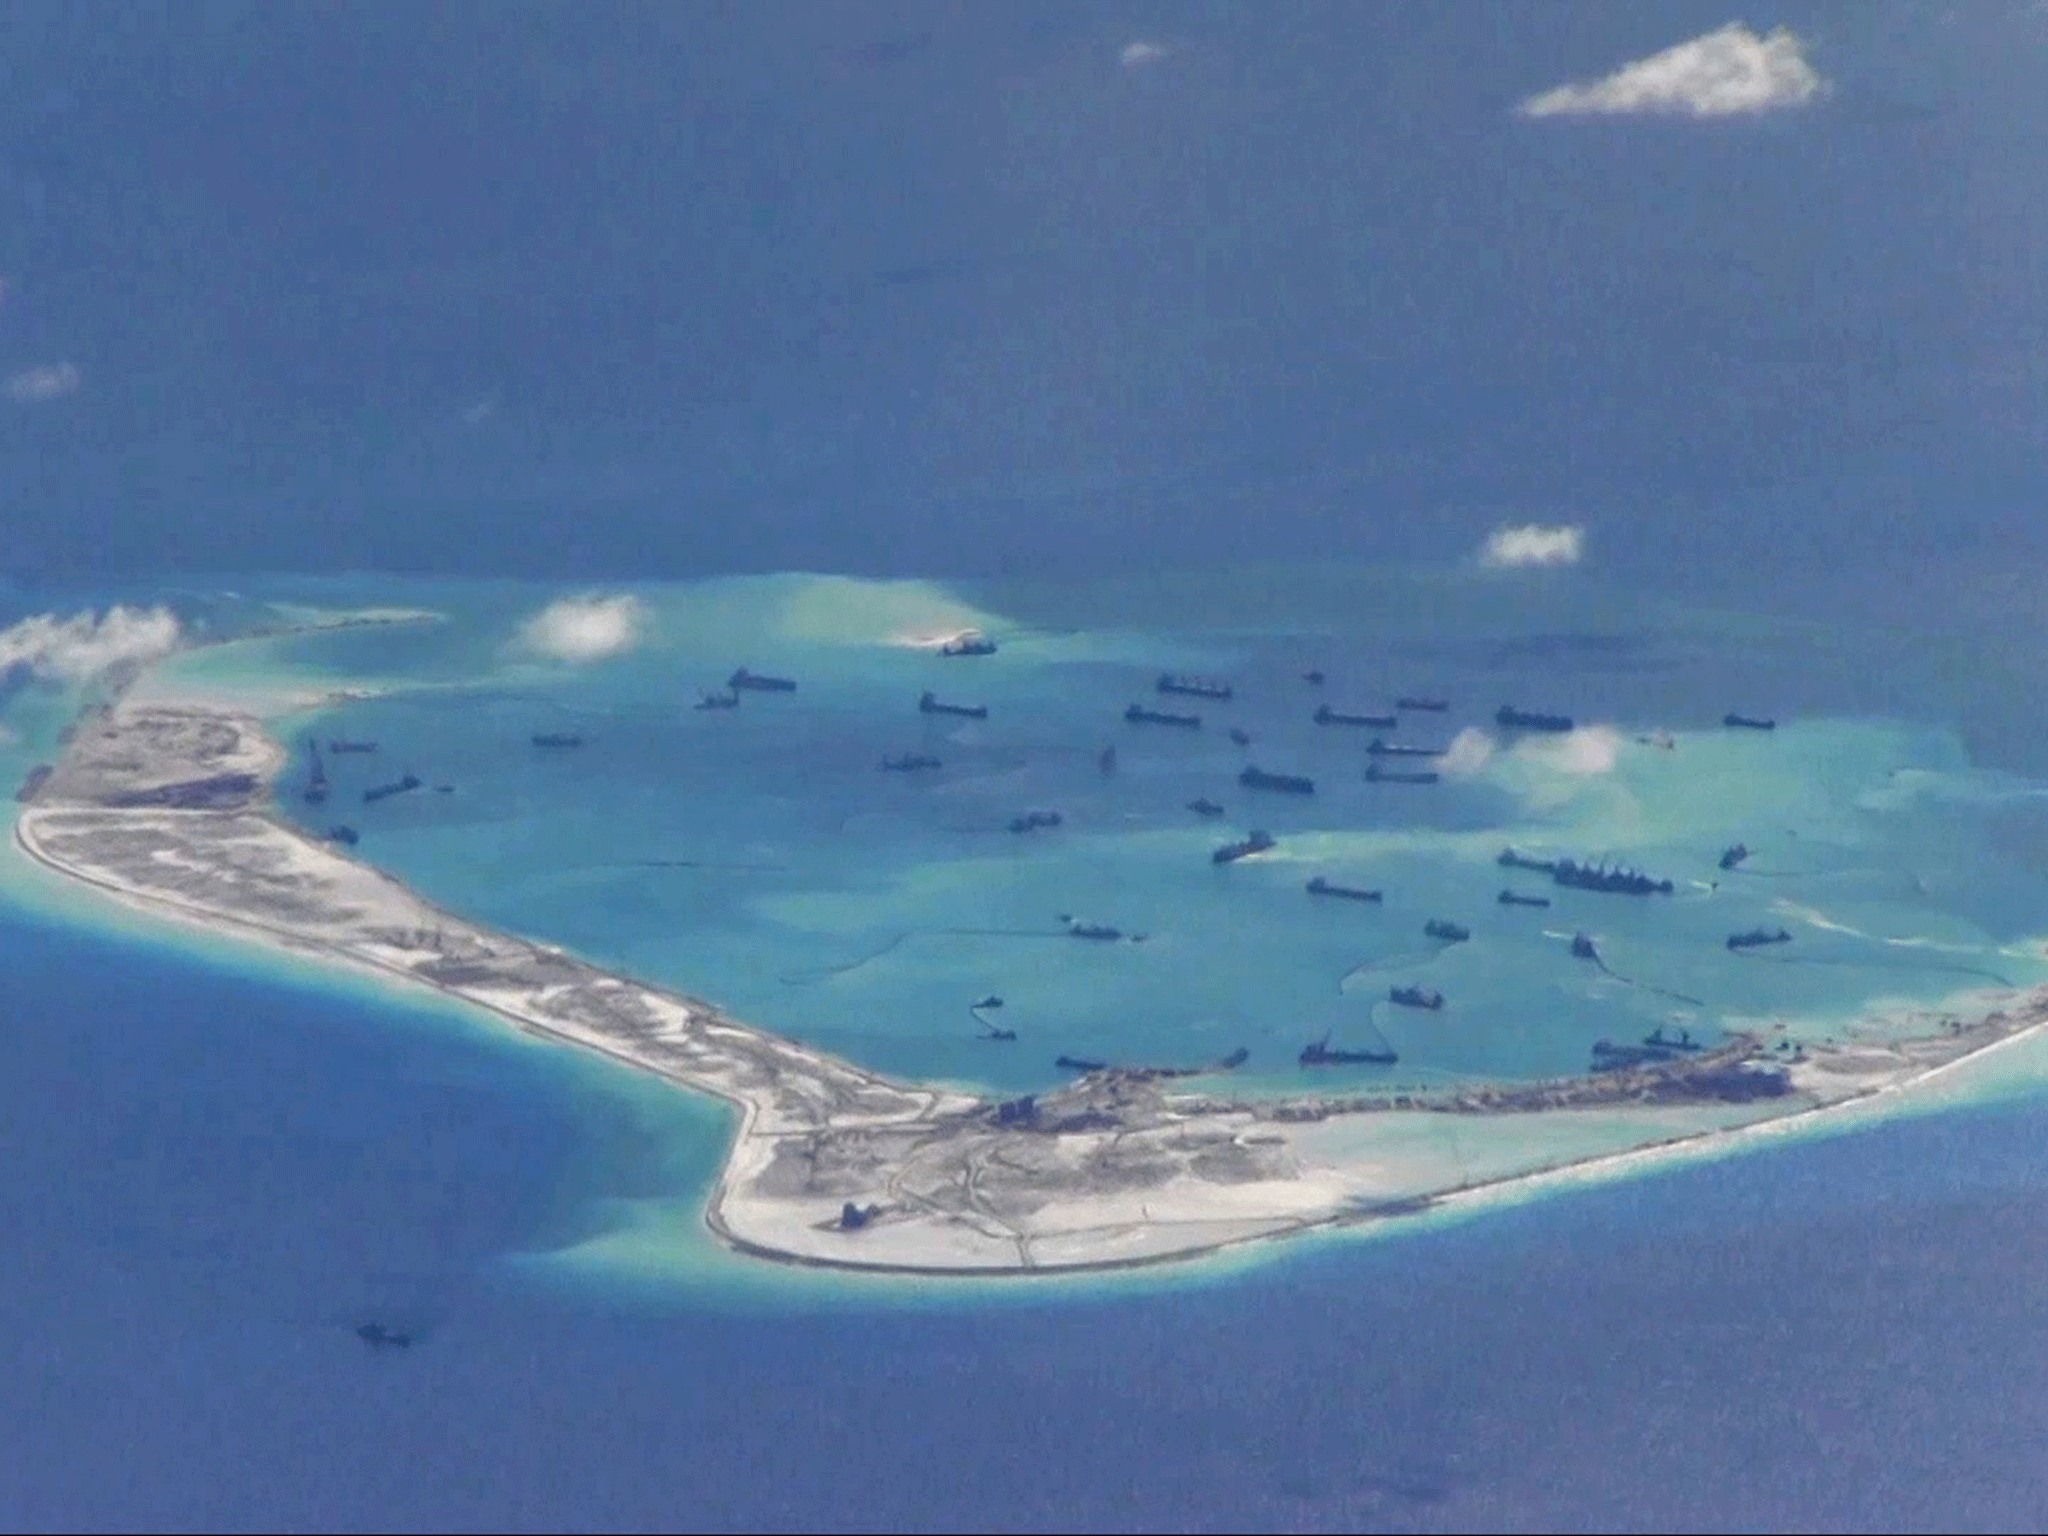 China has been constructing what are believed to be military bases on disputed reefs